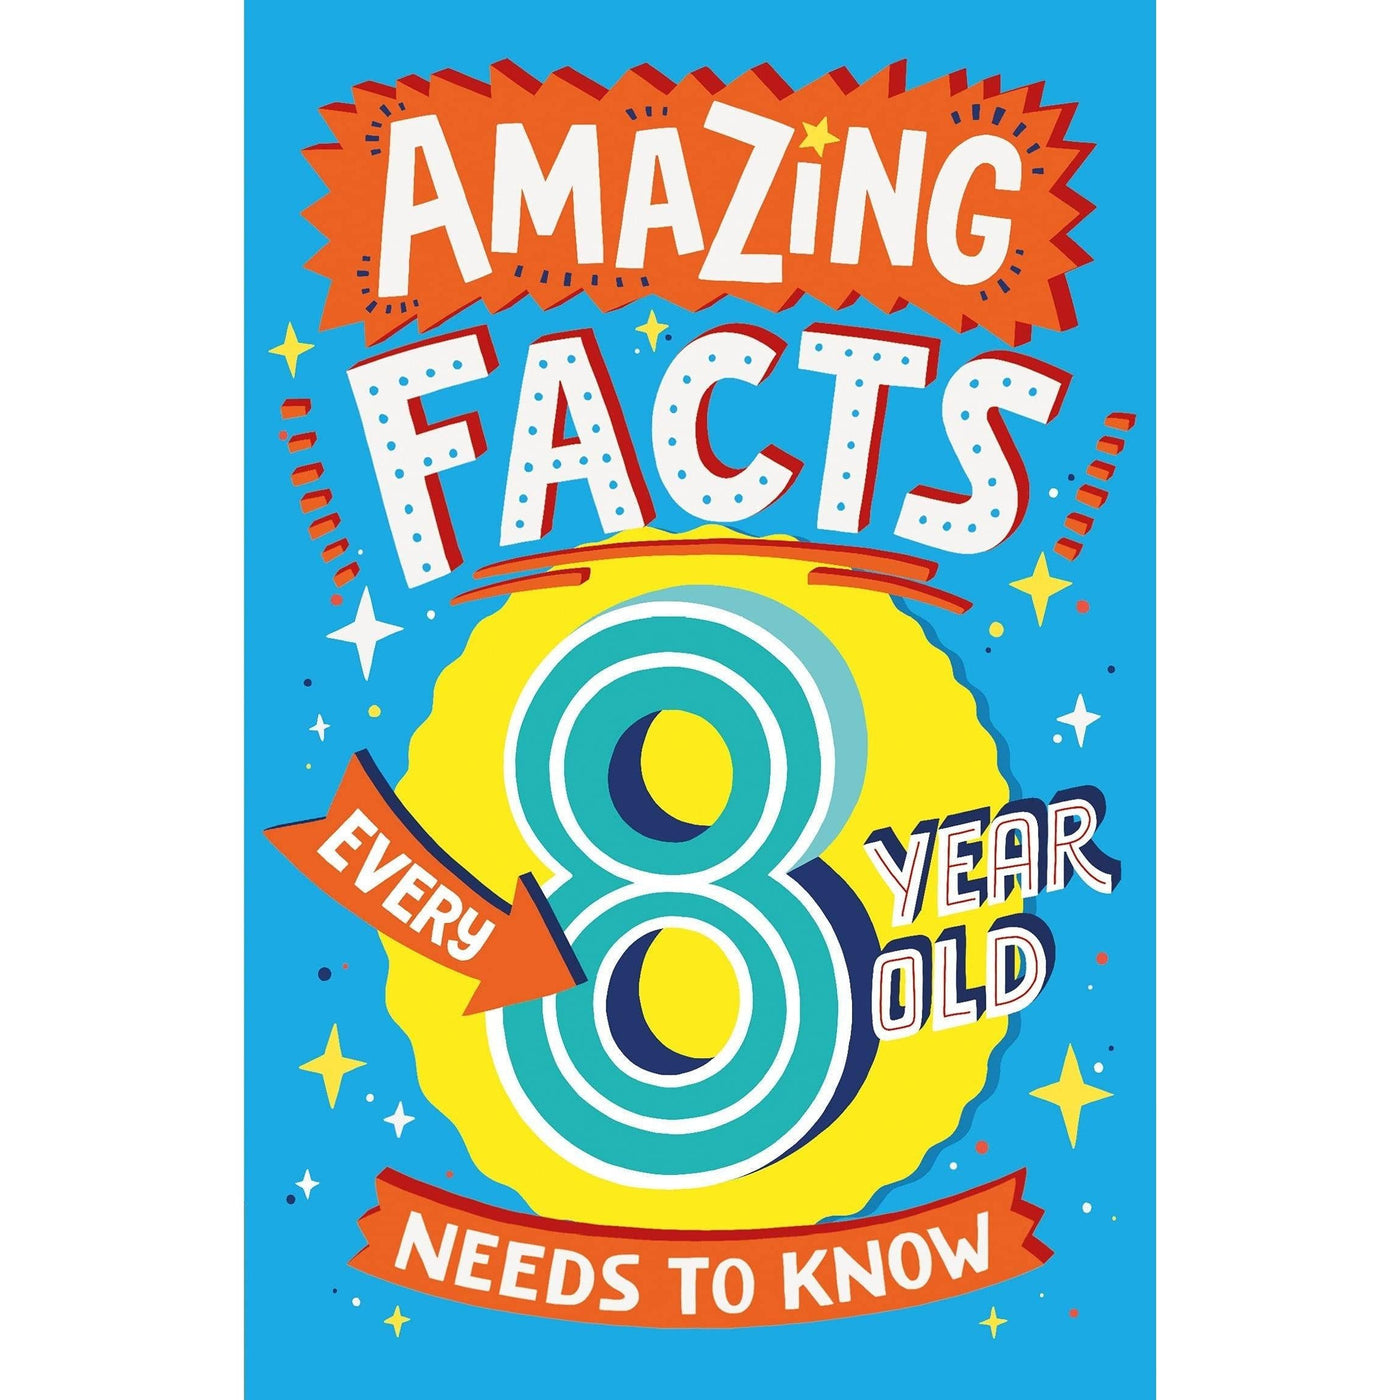 Amazing Facts Every 8 Year Old Needs to Know (Amazing Facts Every Kid Needs to Know)